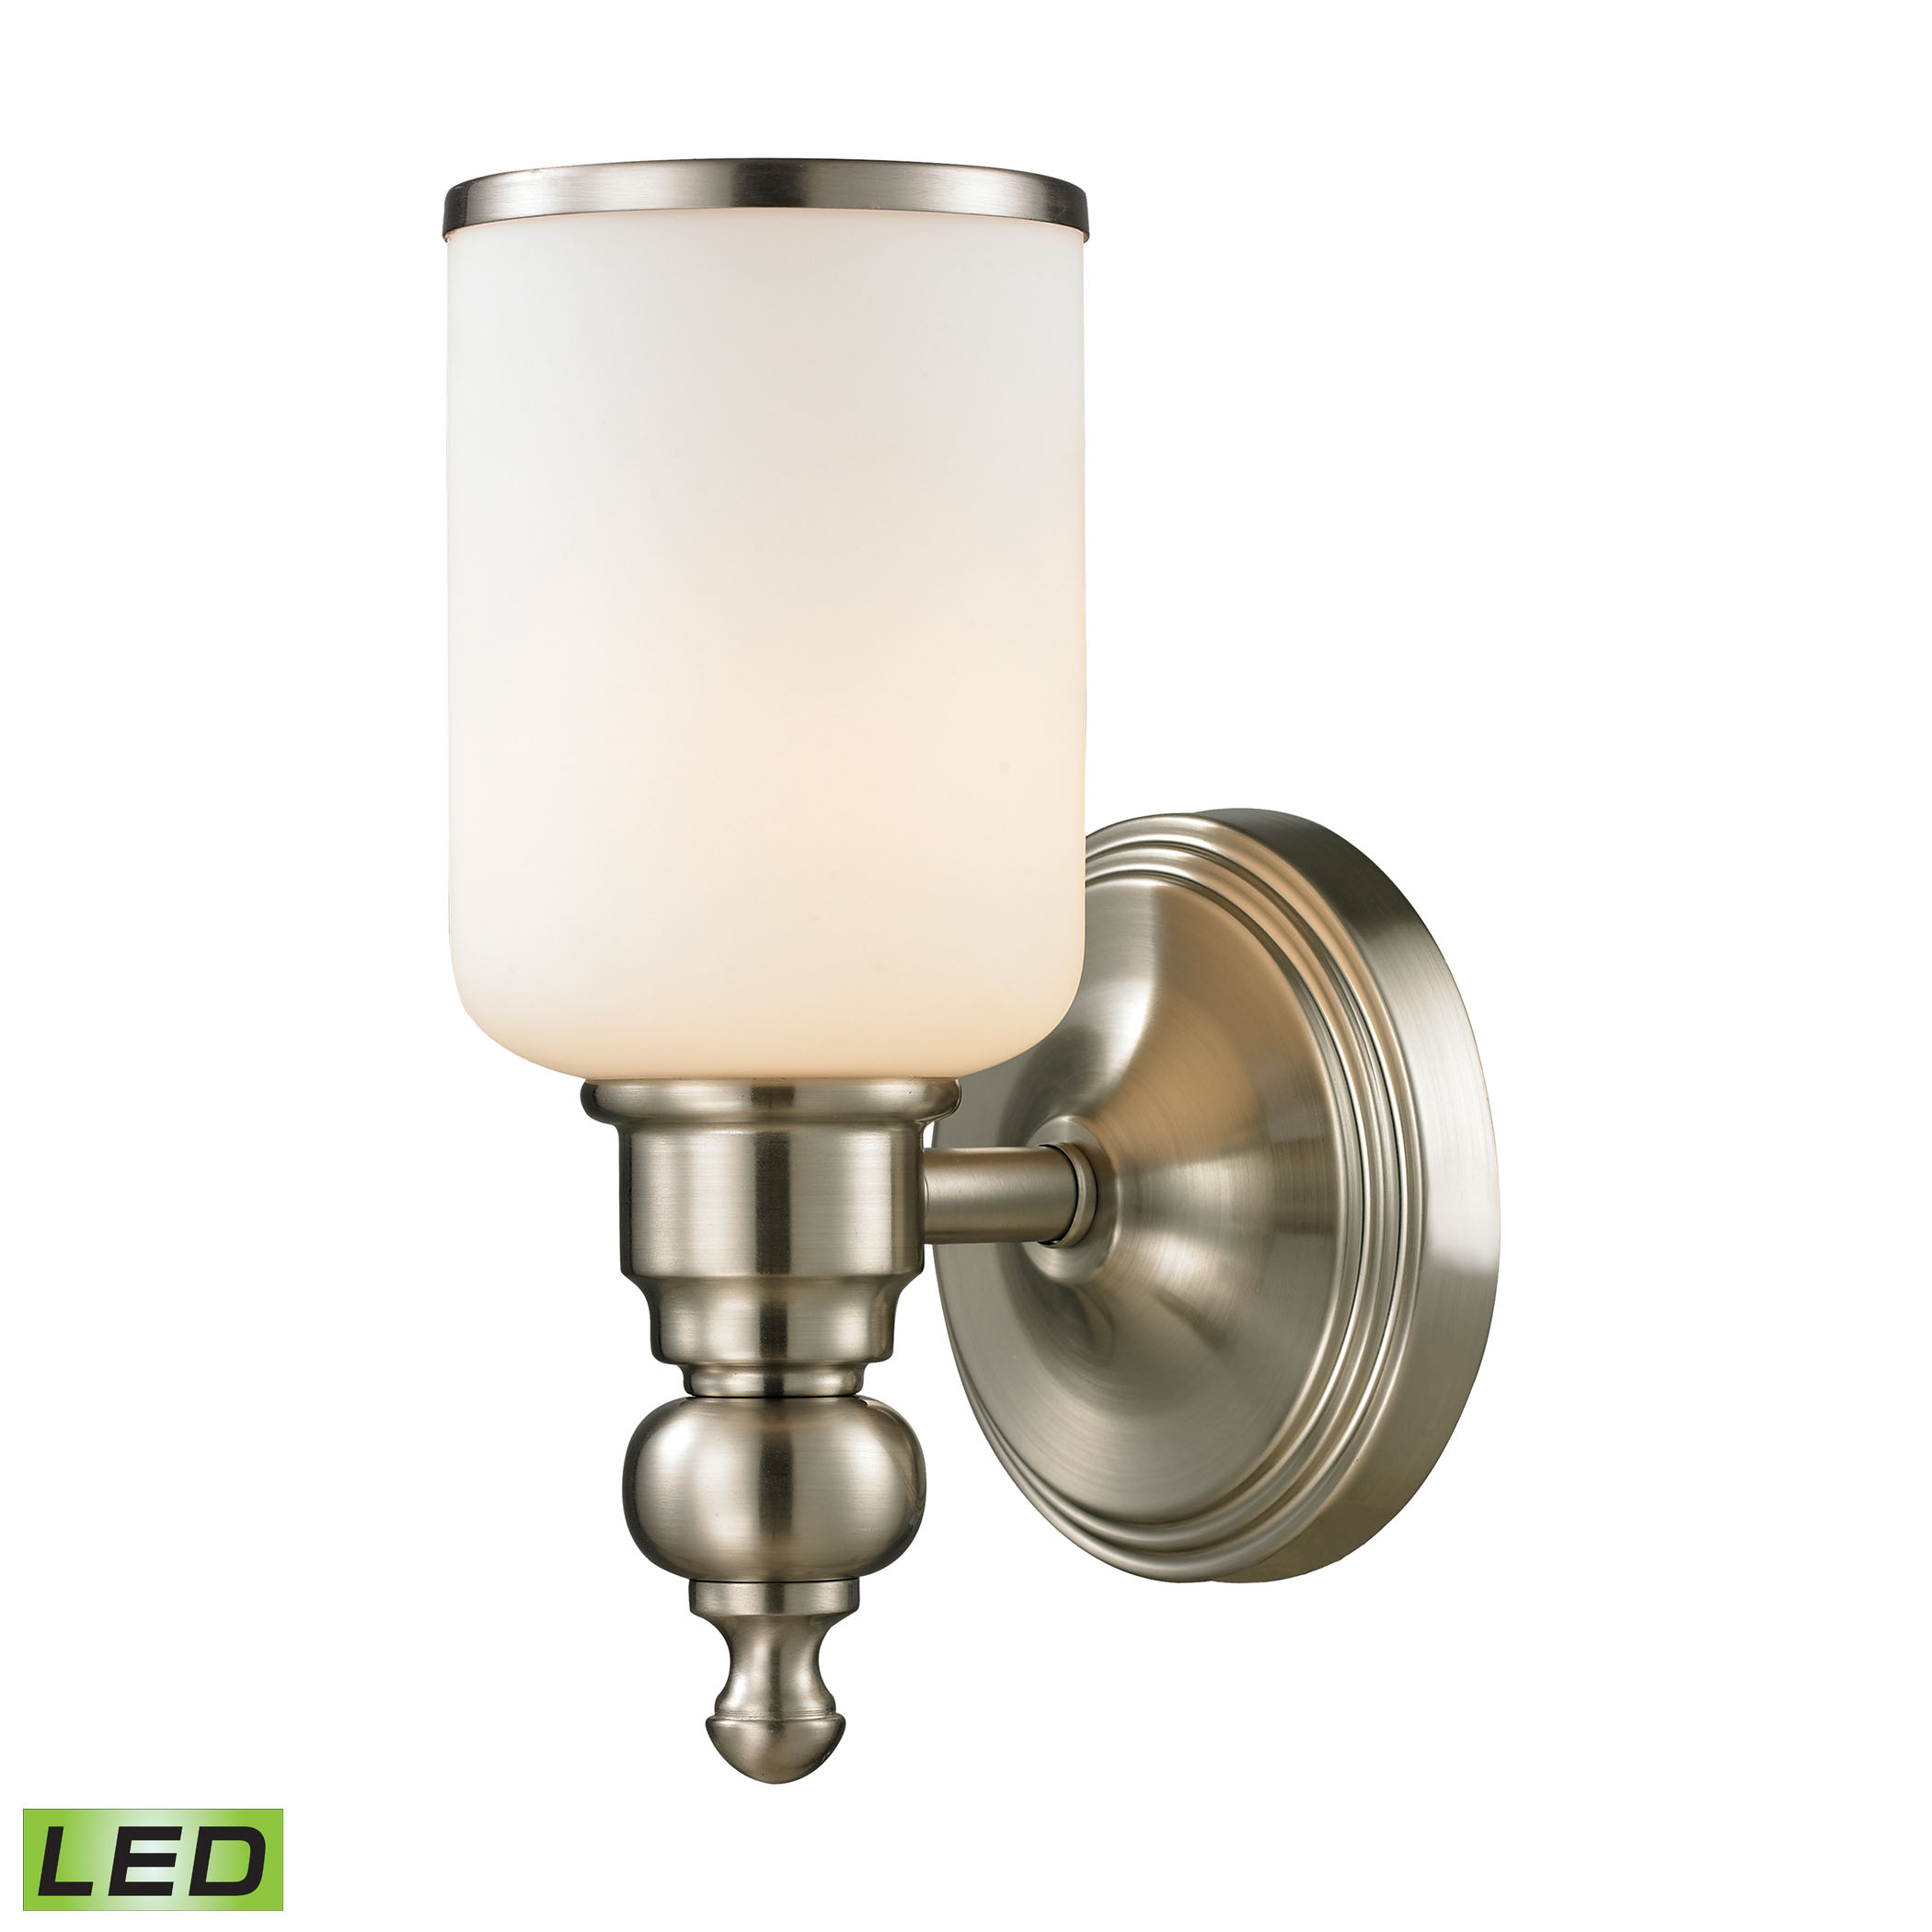 Bristol Collection 1 light bath in Brushed Nickel - LED Offering Up To 800 Lumens (60 Watt Equivalent)